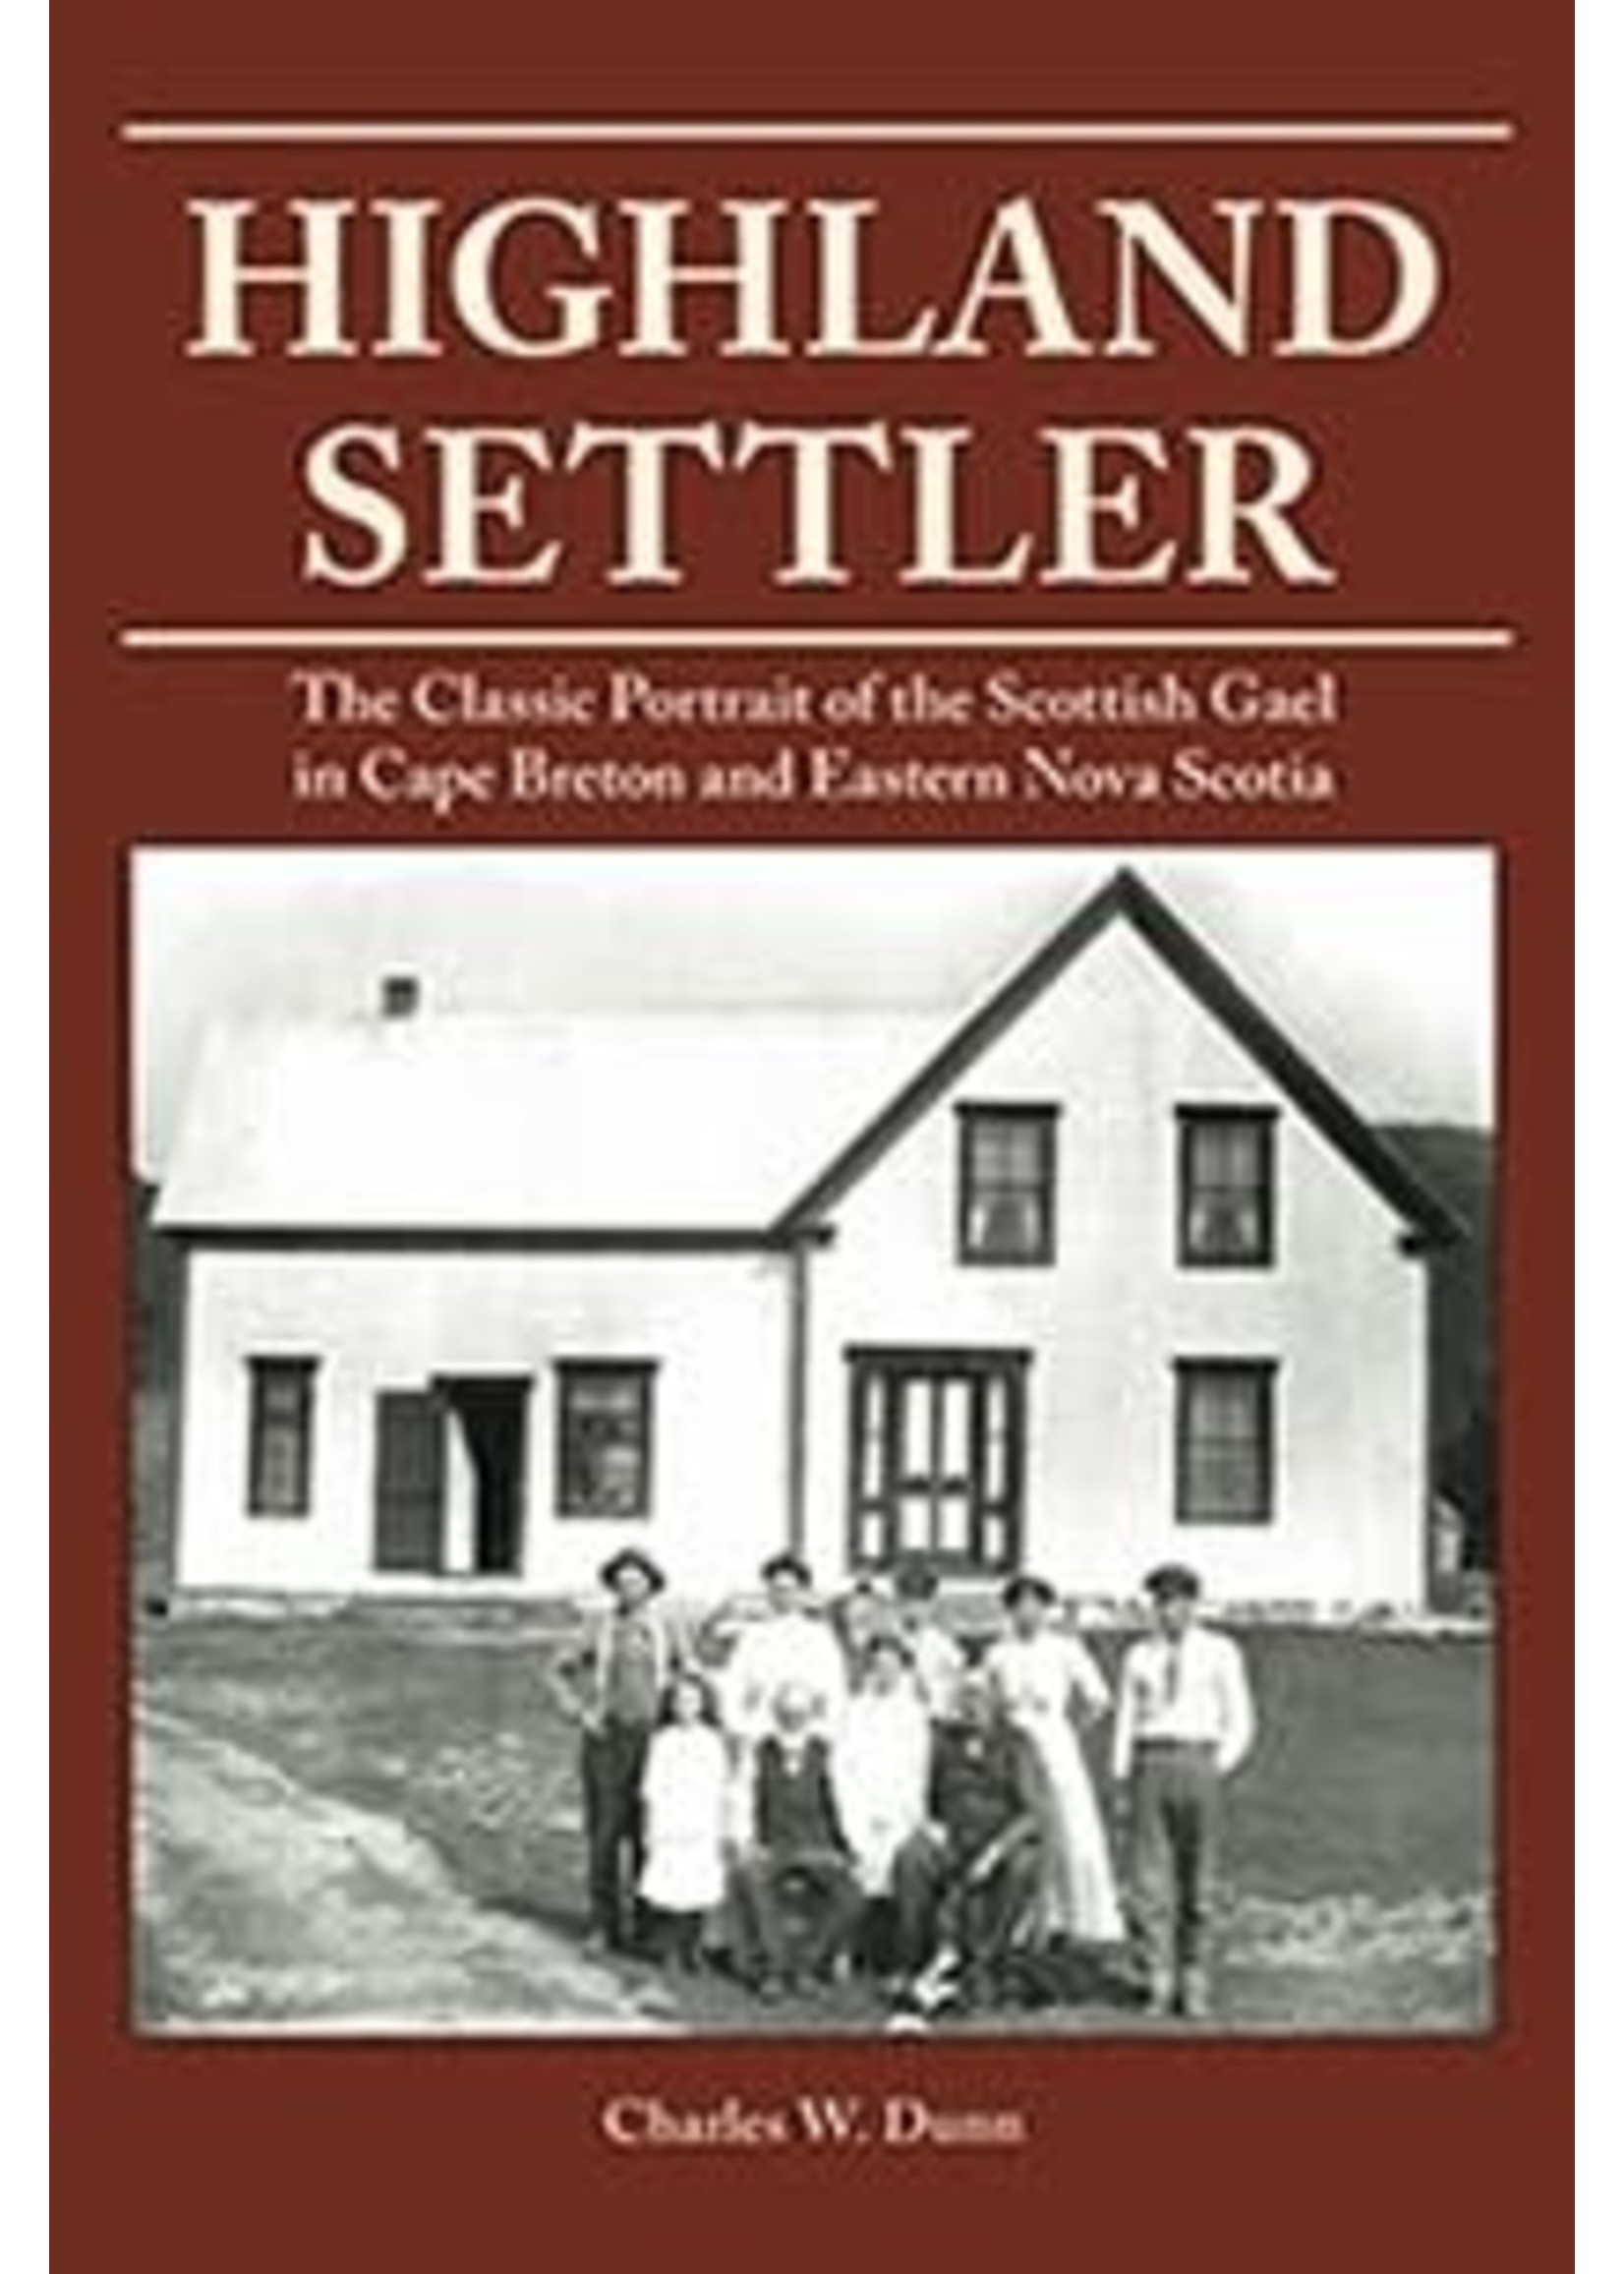 Highland Settler: The Classic Portrait of the Scottish Gael in Cape Breton and Eastern Nova Scotia by Charles W. Dunn